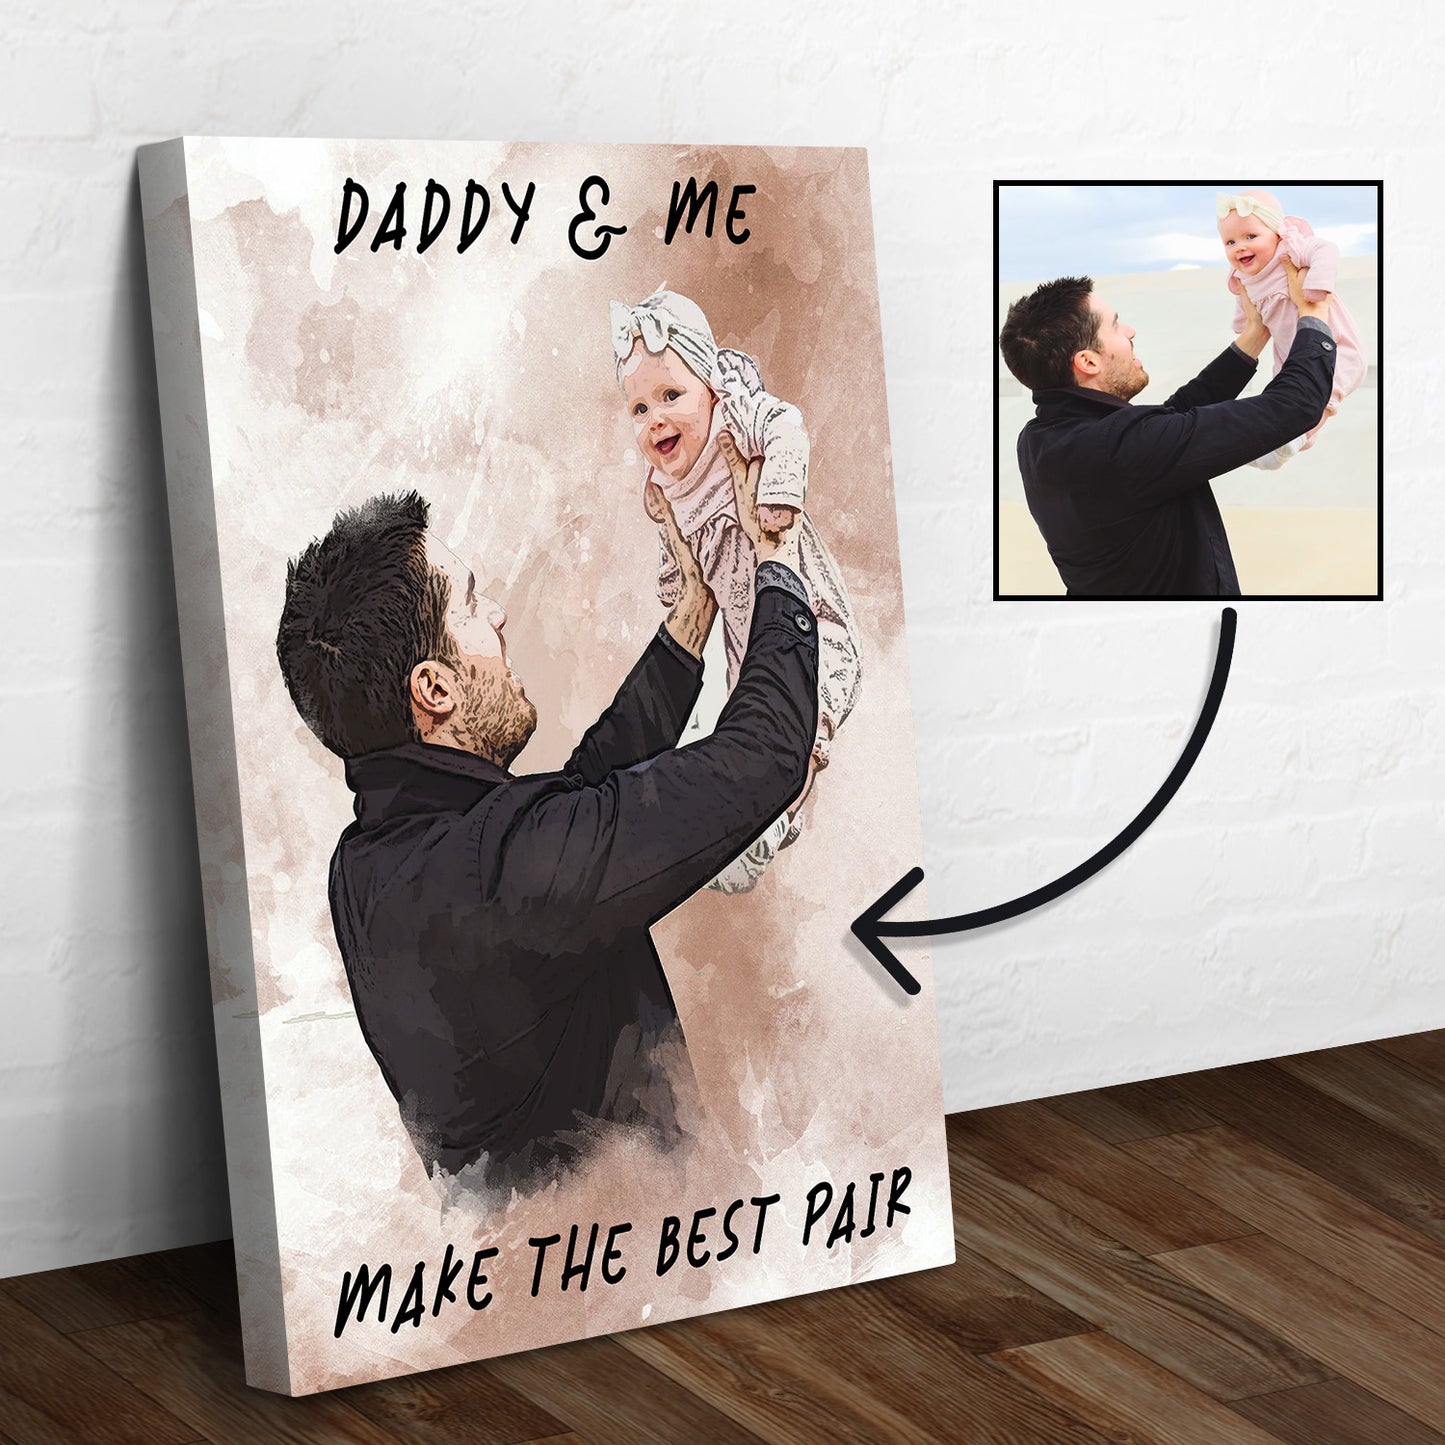 Daddy & Me Make the Best Pair Sign - Image by Tailored Canvases